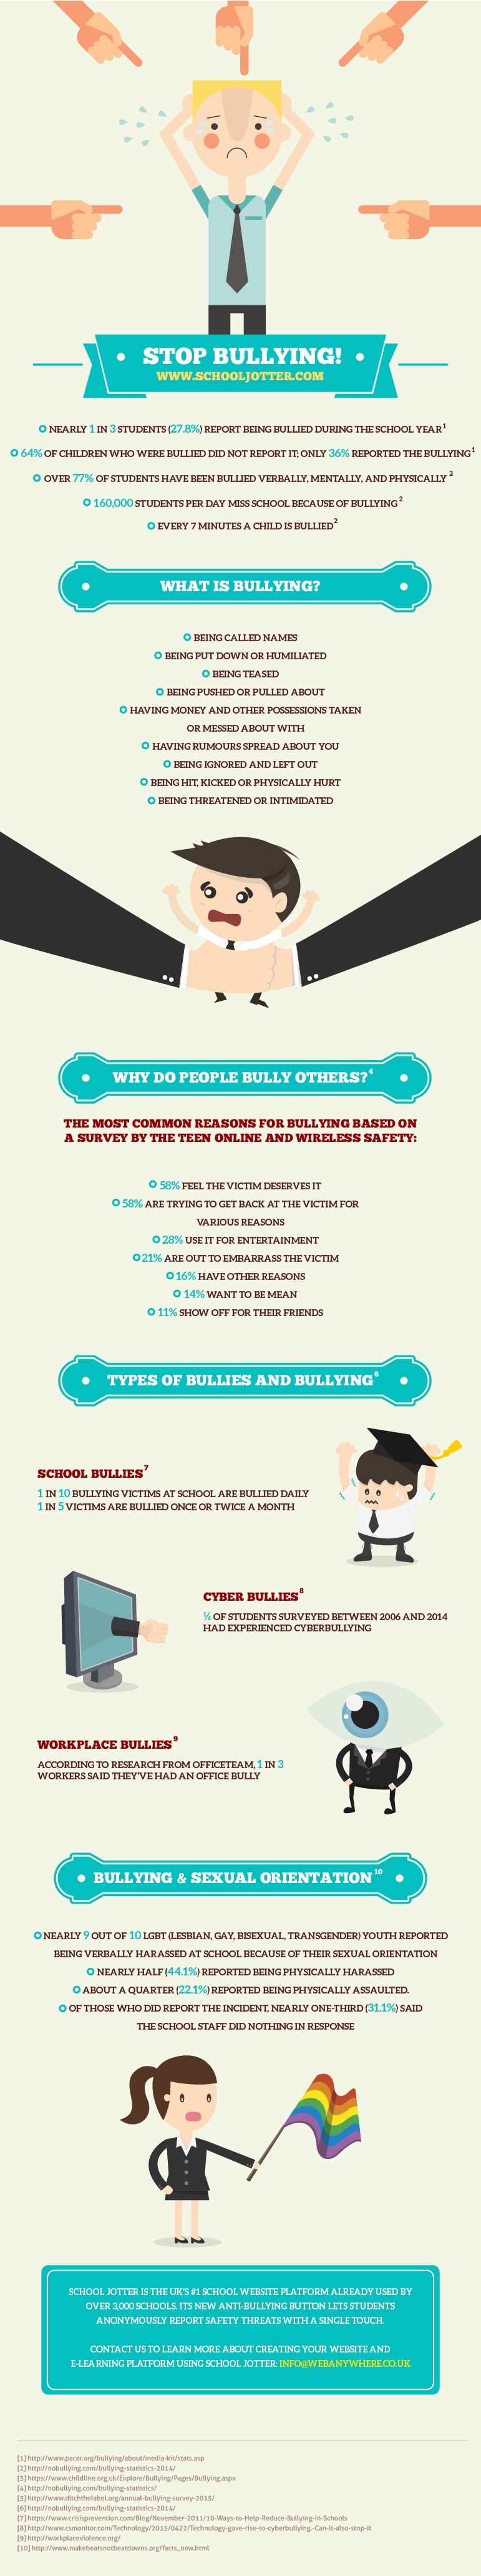 Stop Bullying! Infographic